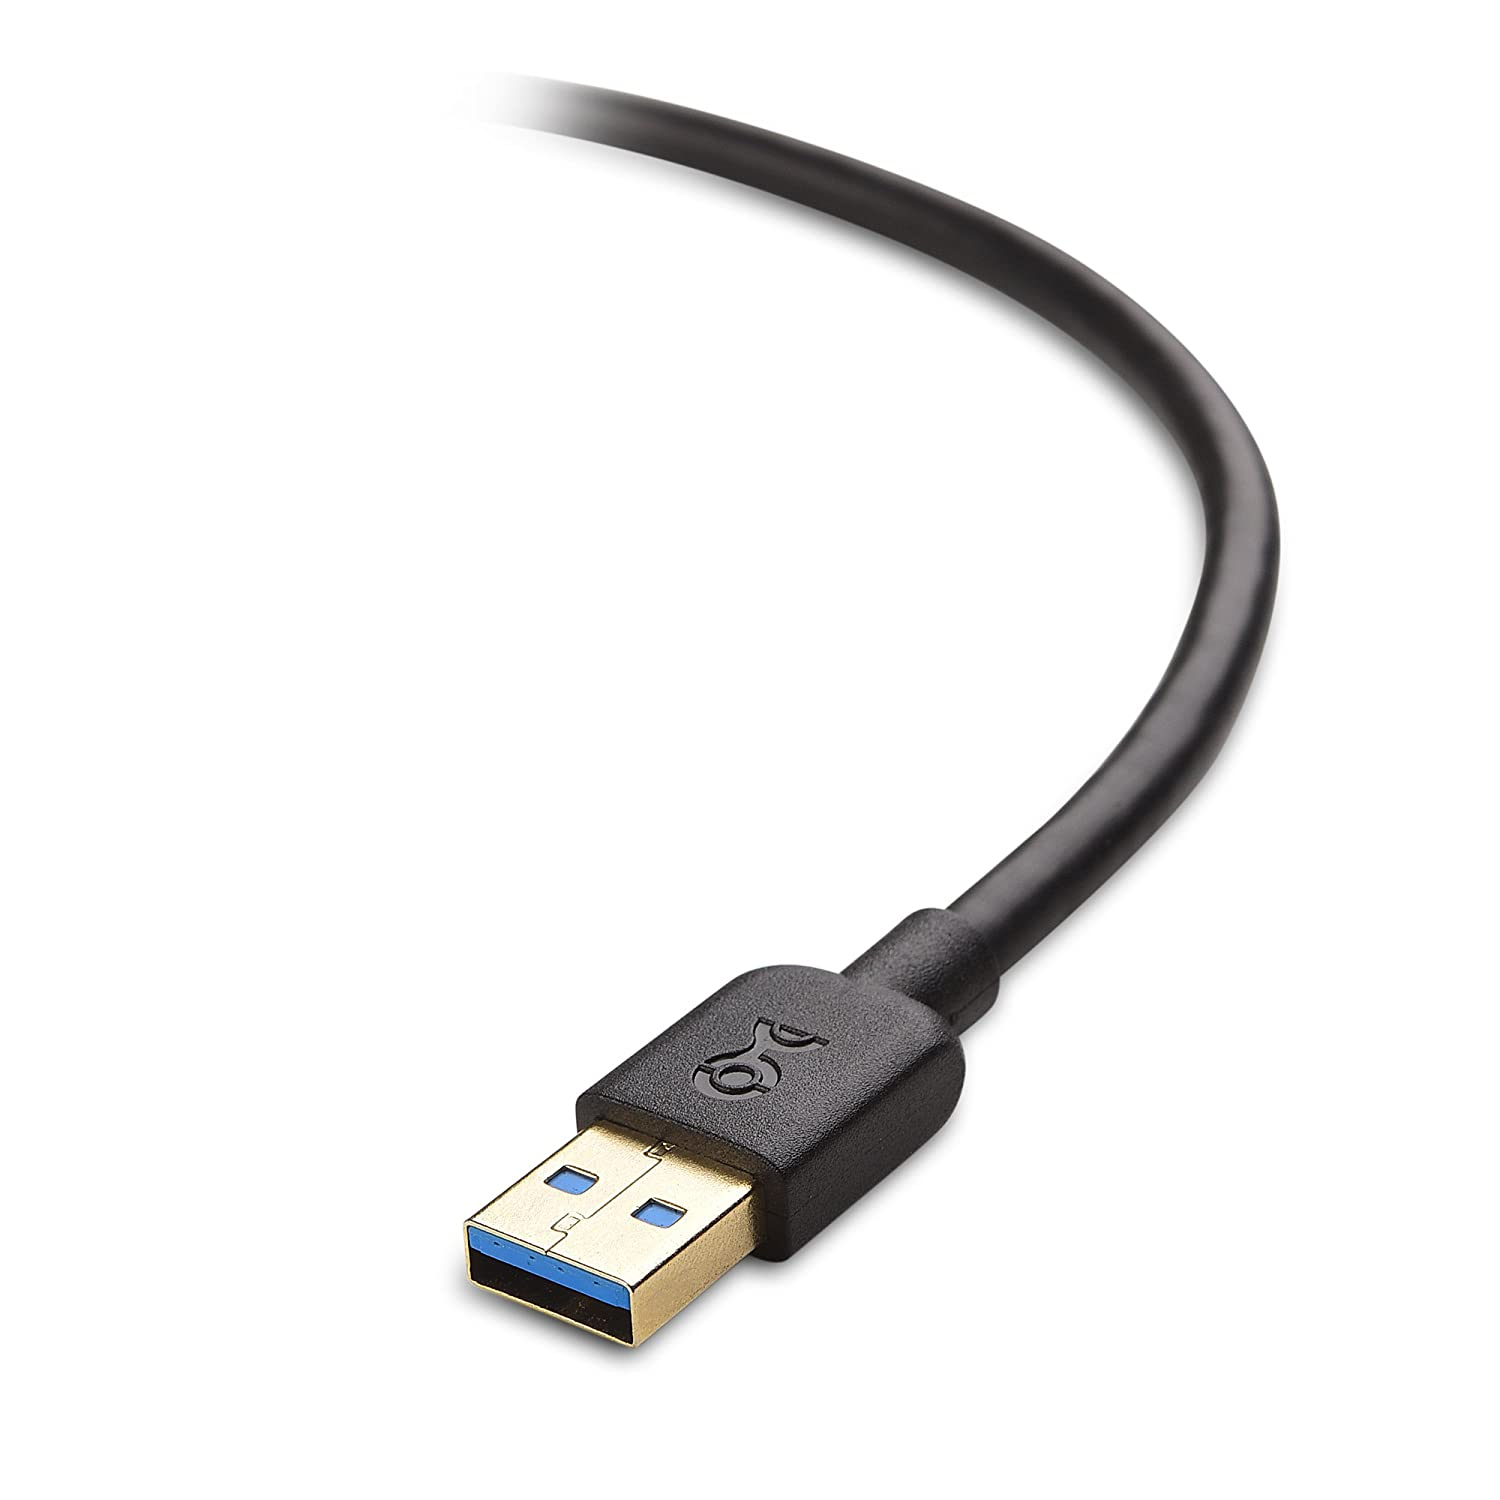 Cable Matters Long USB 3.0 Cable (USB 3 Cable, USB 3.0 A to B Cable) in